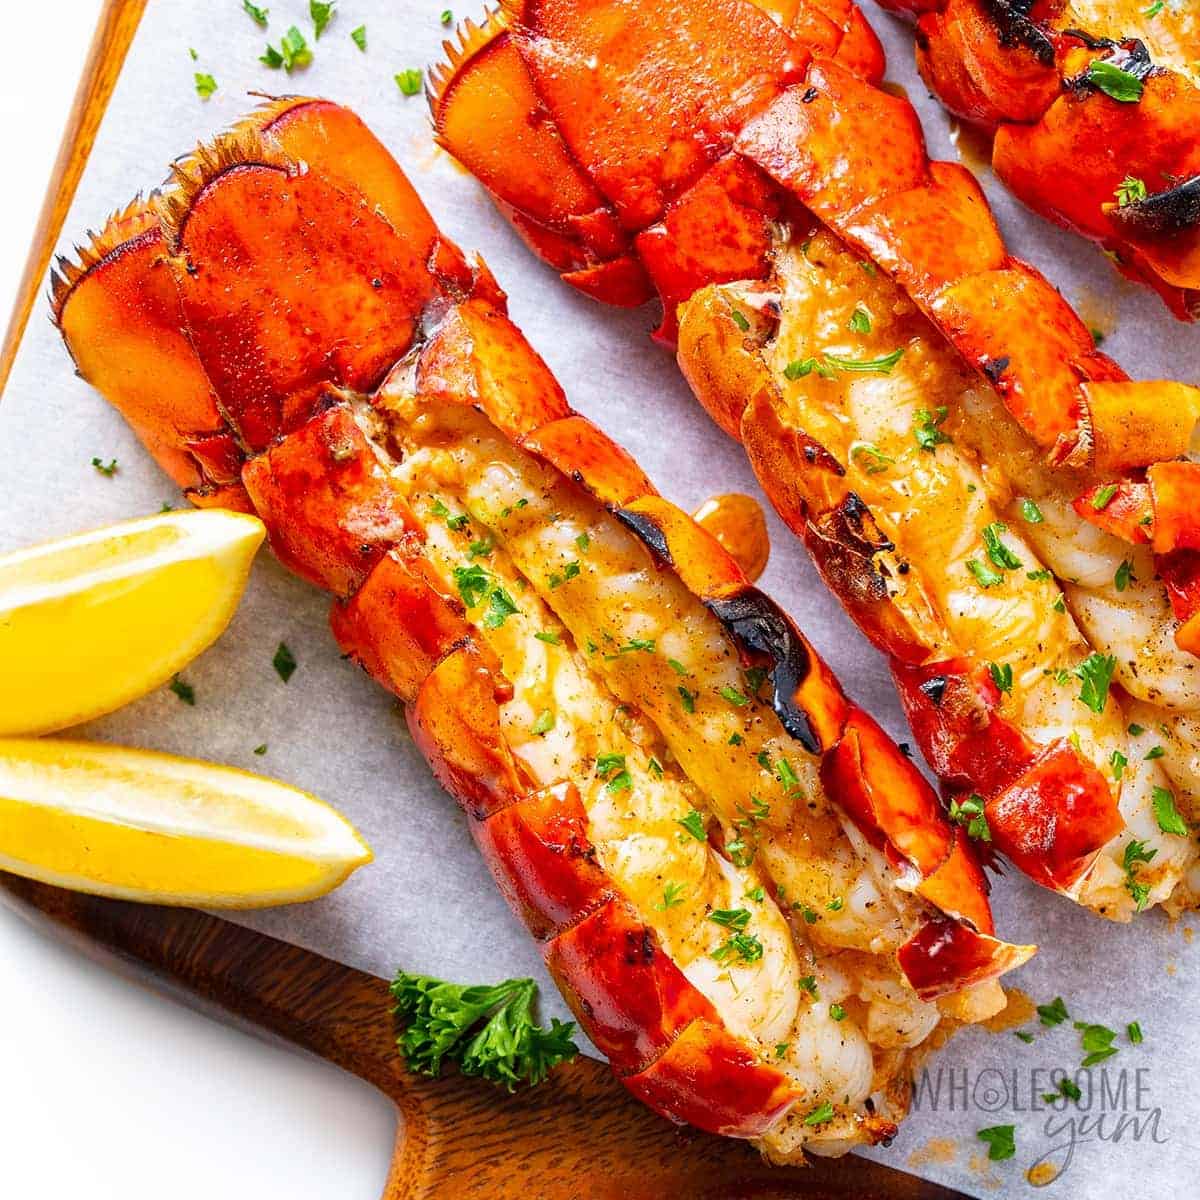 Grilled lobster tail on a cutting board.